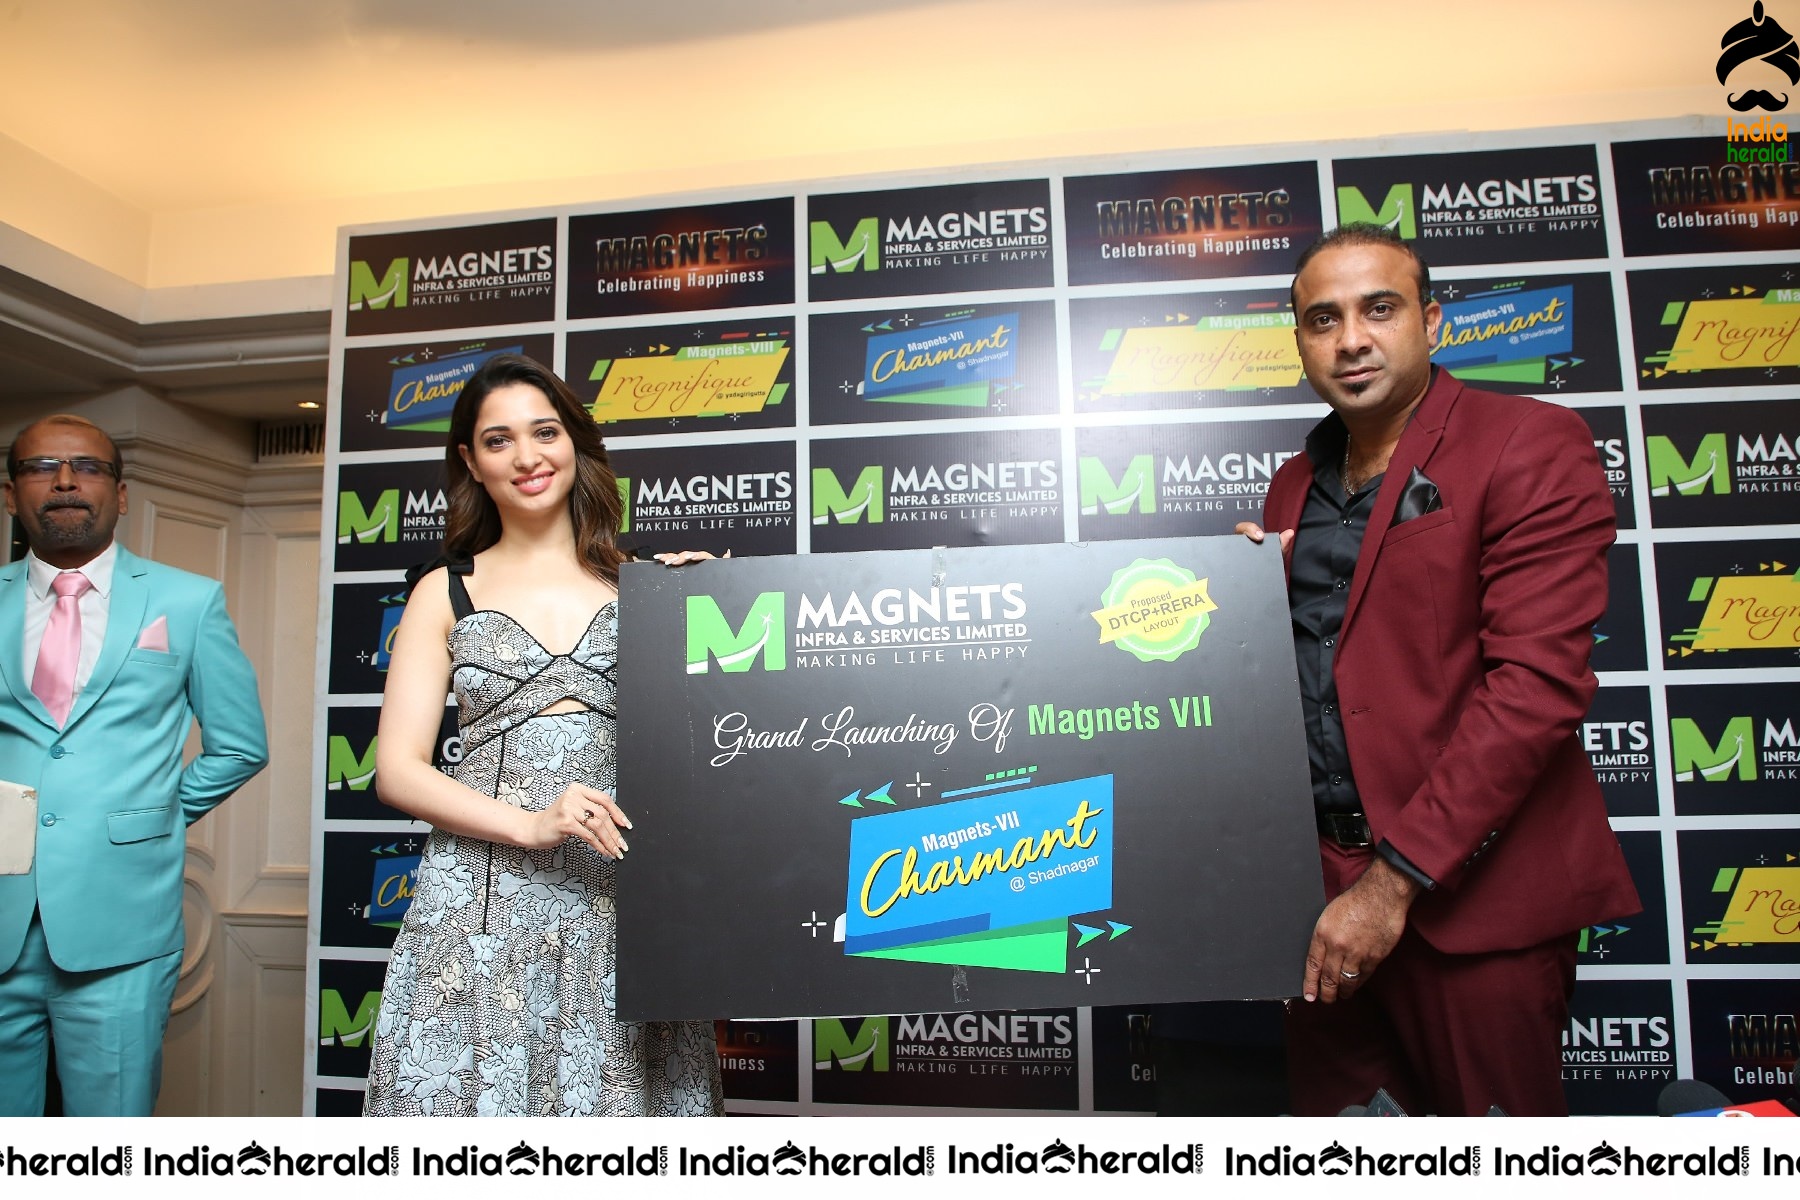 Tamannaah launches new Projects of Magnets Infra and Services Set 2